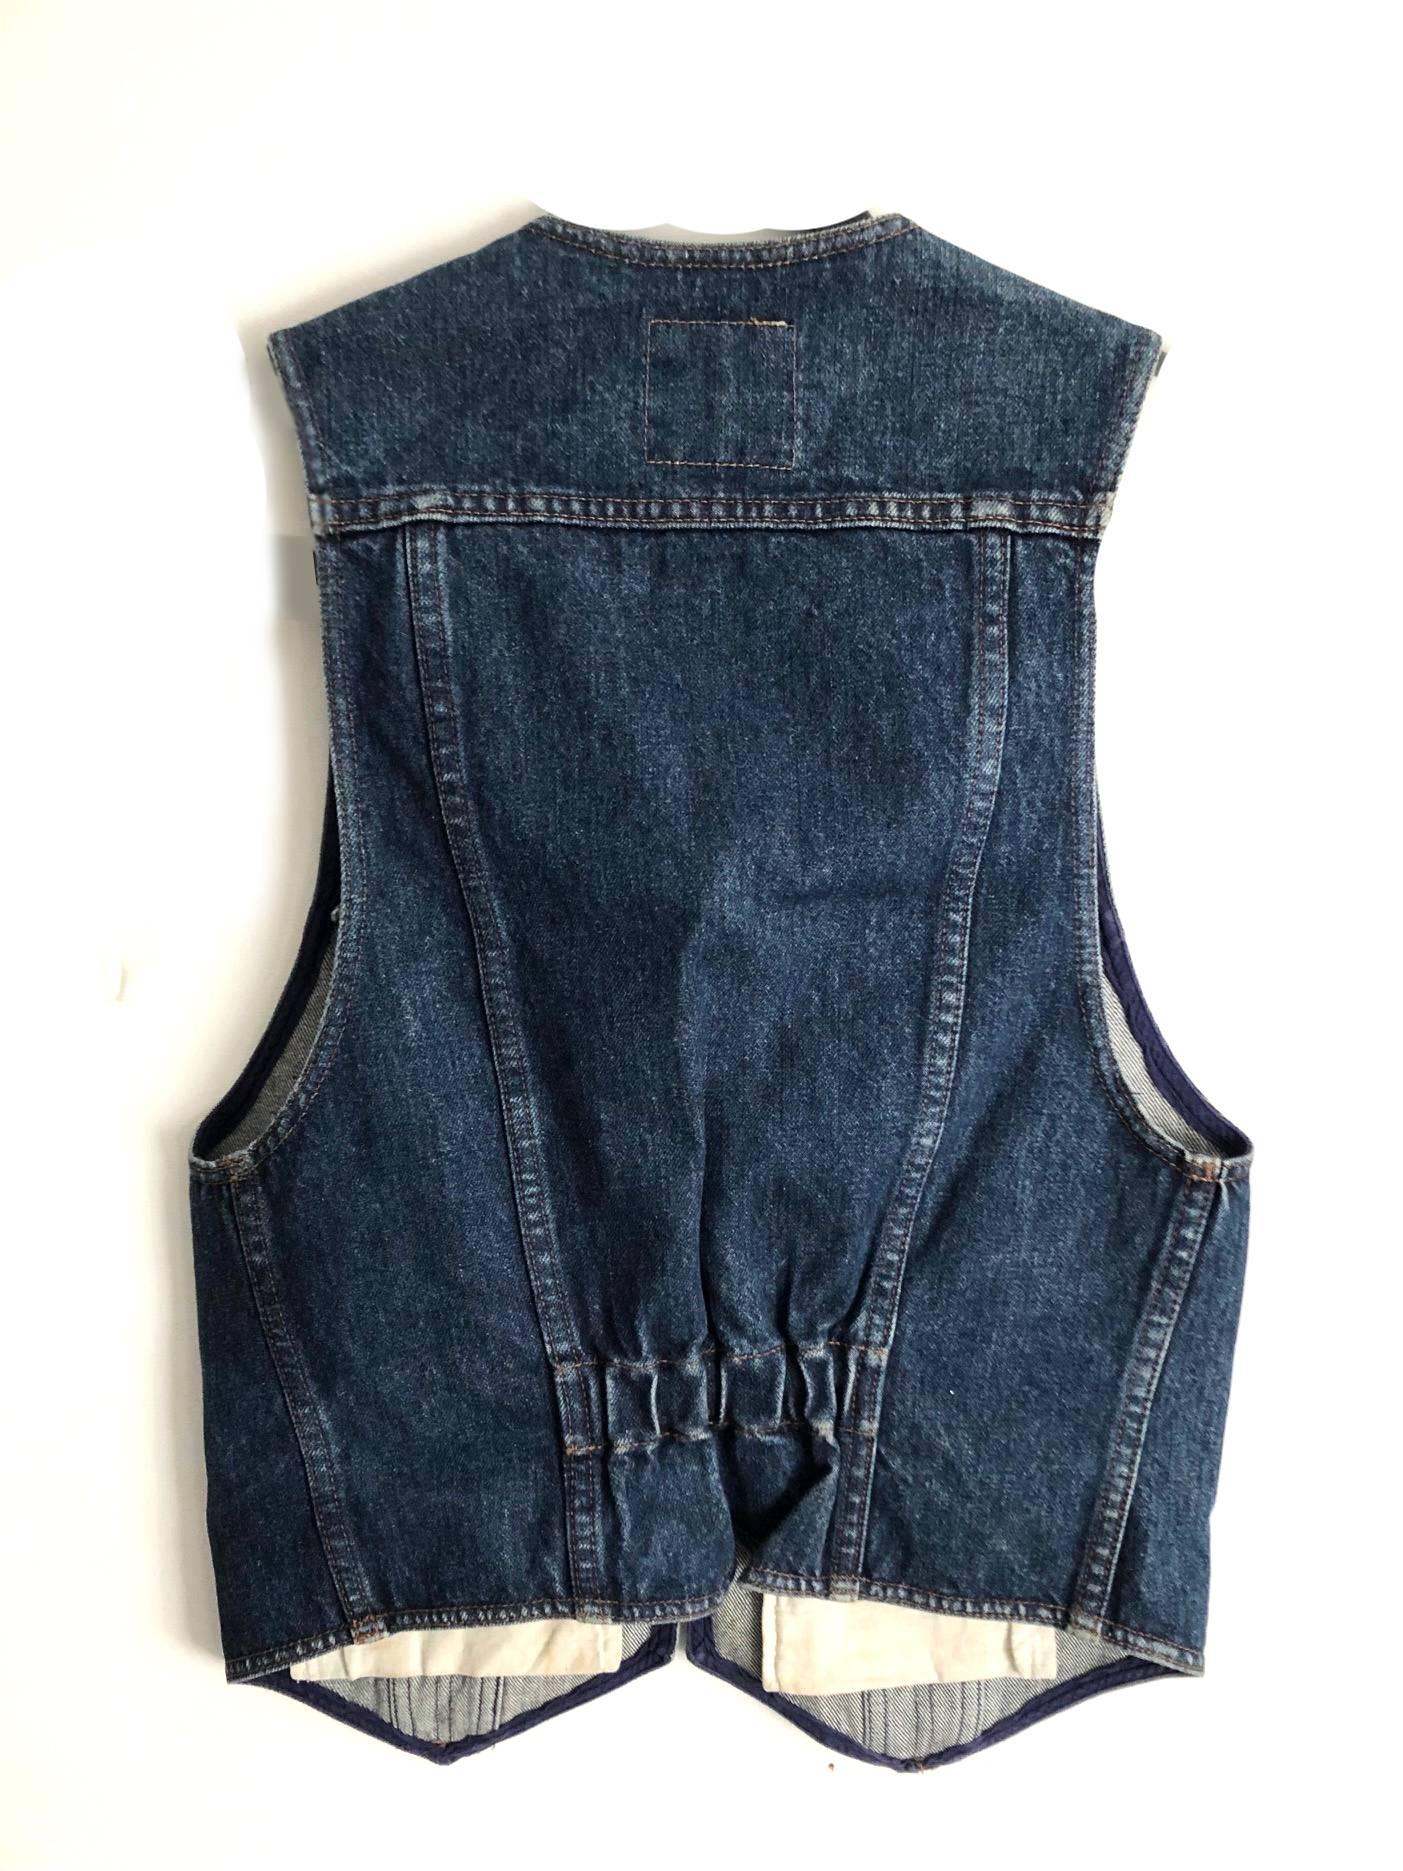 Moschino denim waistcoat, 4 front fake pockets, front bronze metal button closure

Size: 44 IT - 10/12 UK - 8 USA 
Condition: 1980s, vintage in like new condition 